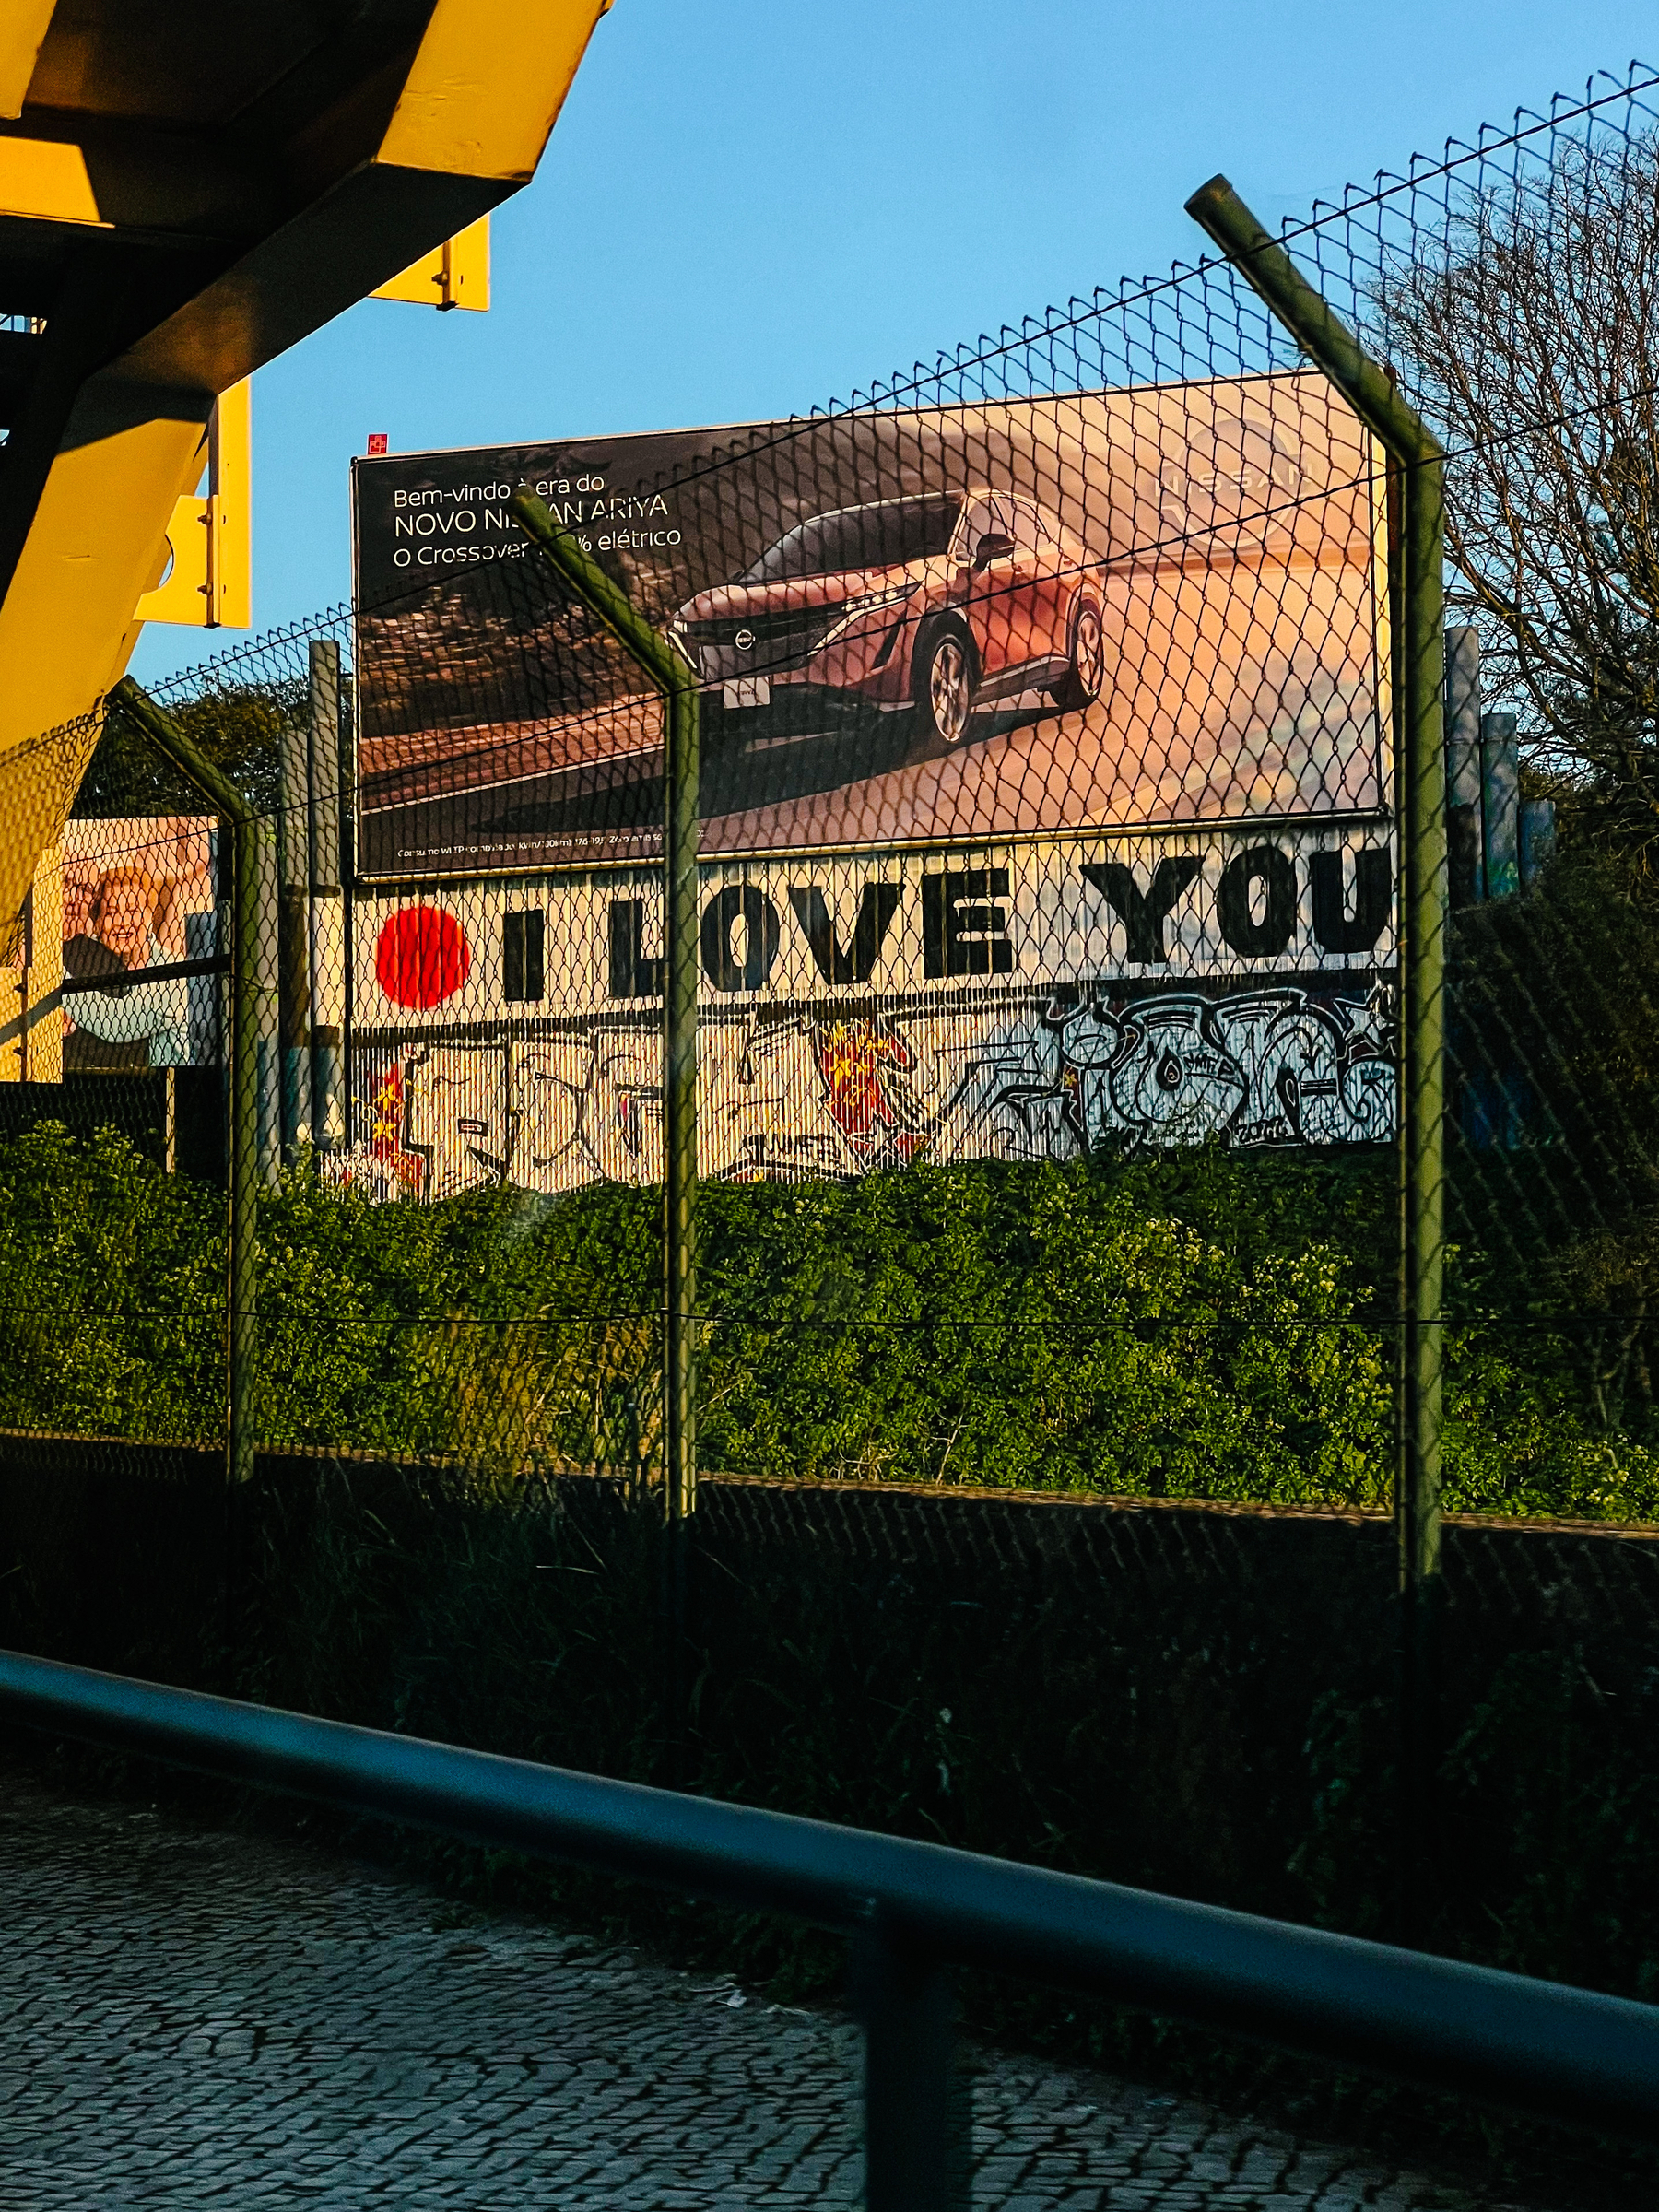 Ad for a car, with “I LOVE YOU” graffitied below. 